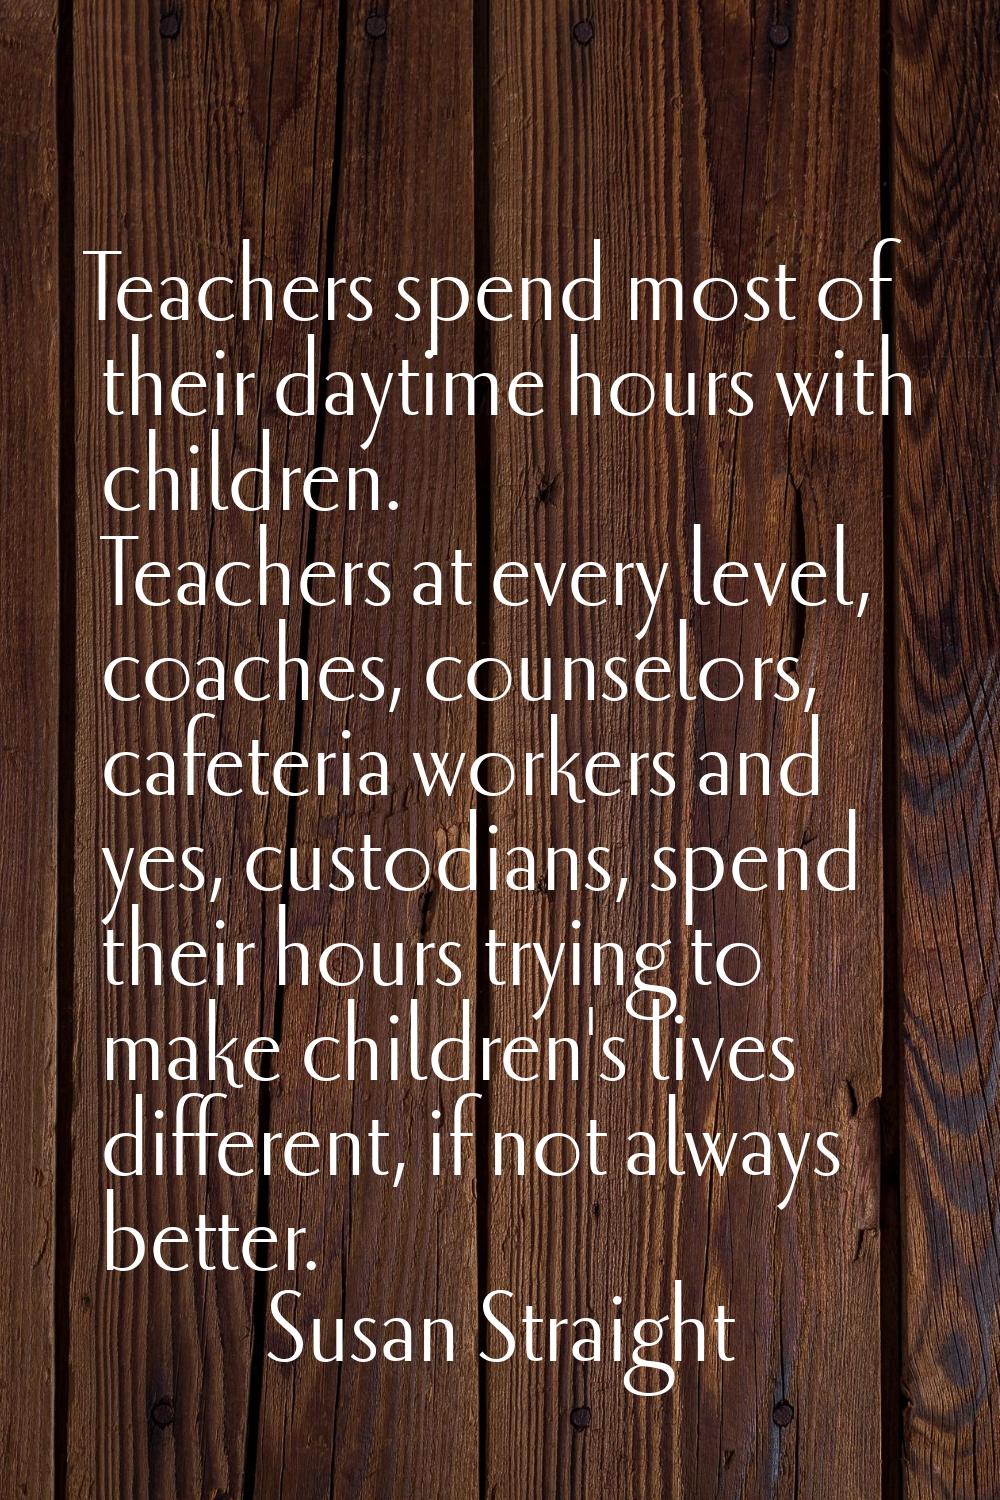 Teachers spend most of their daytime hours with children. Teachers at every level, coaches, counsel